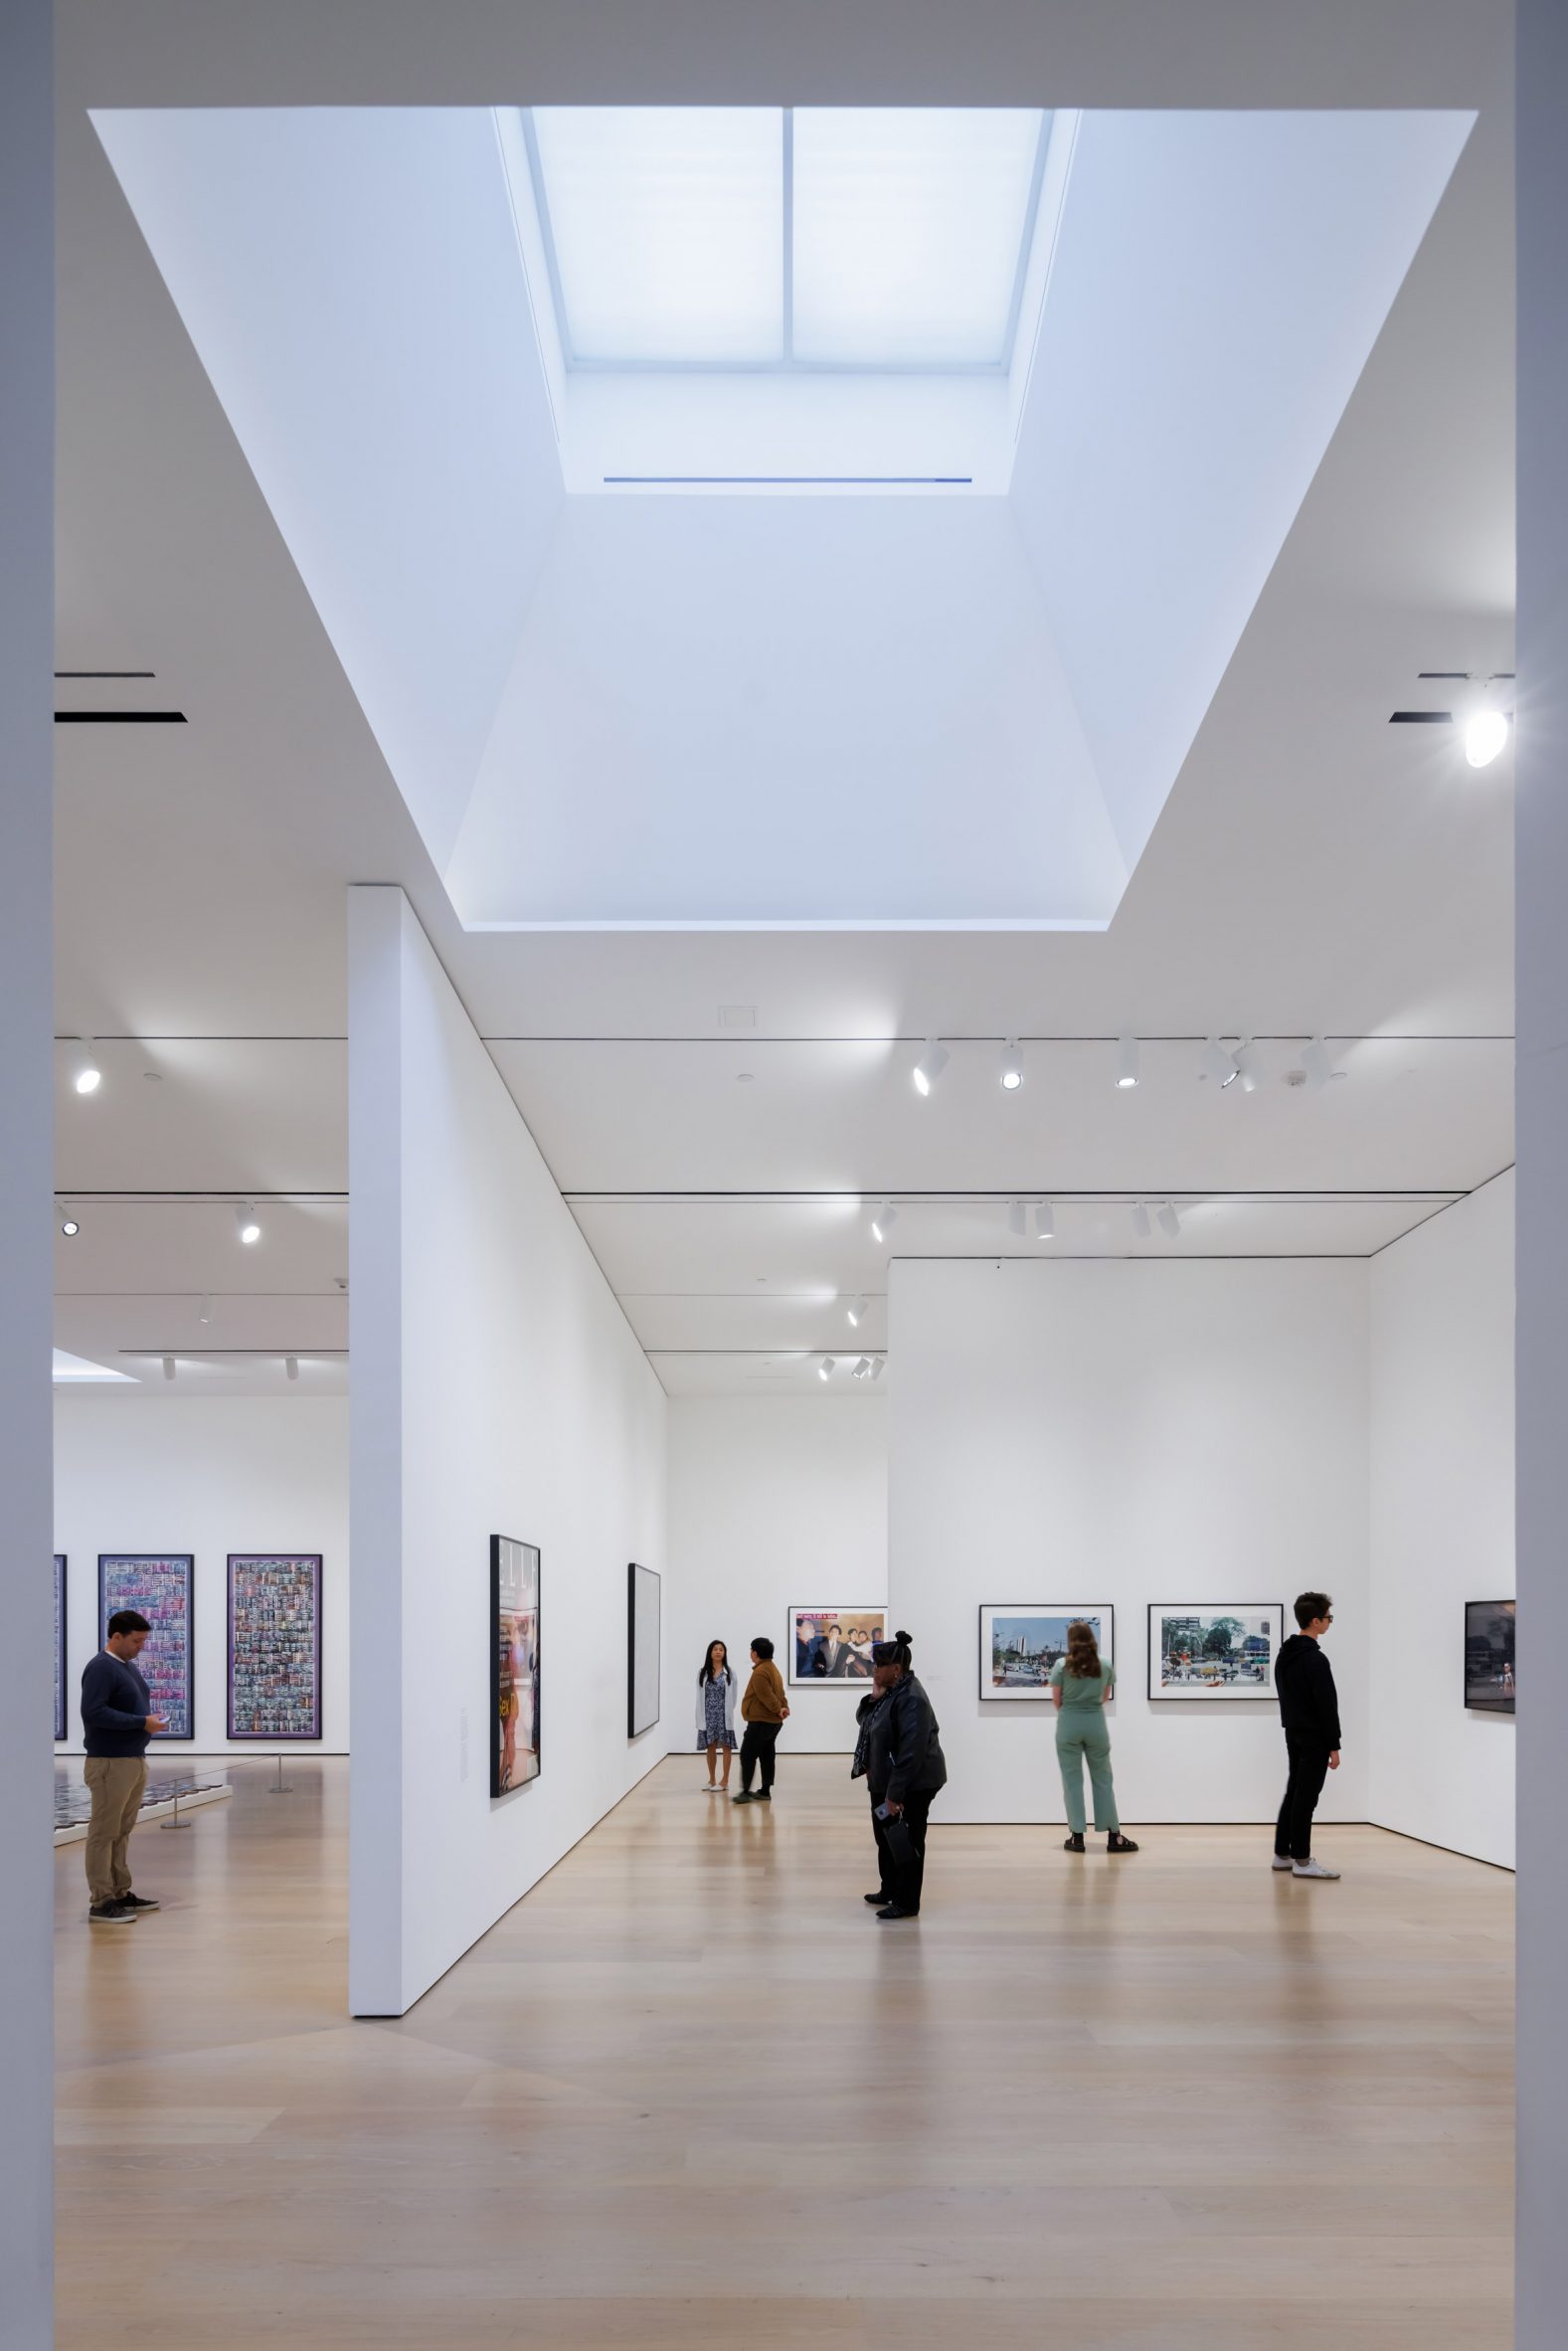 Internal gallery space at the Hammer Museum with white walls and wooden floors